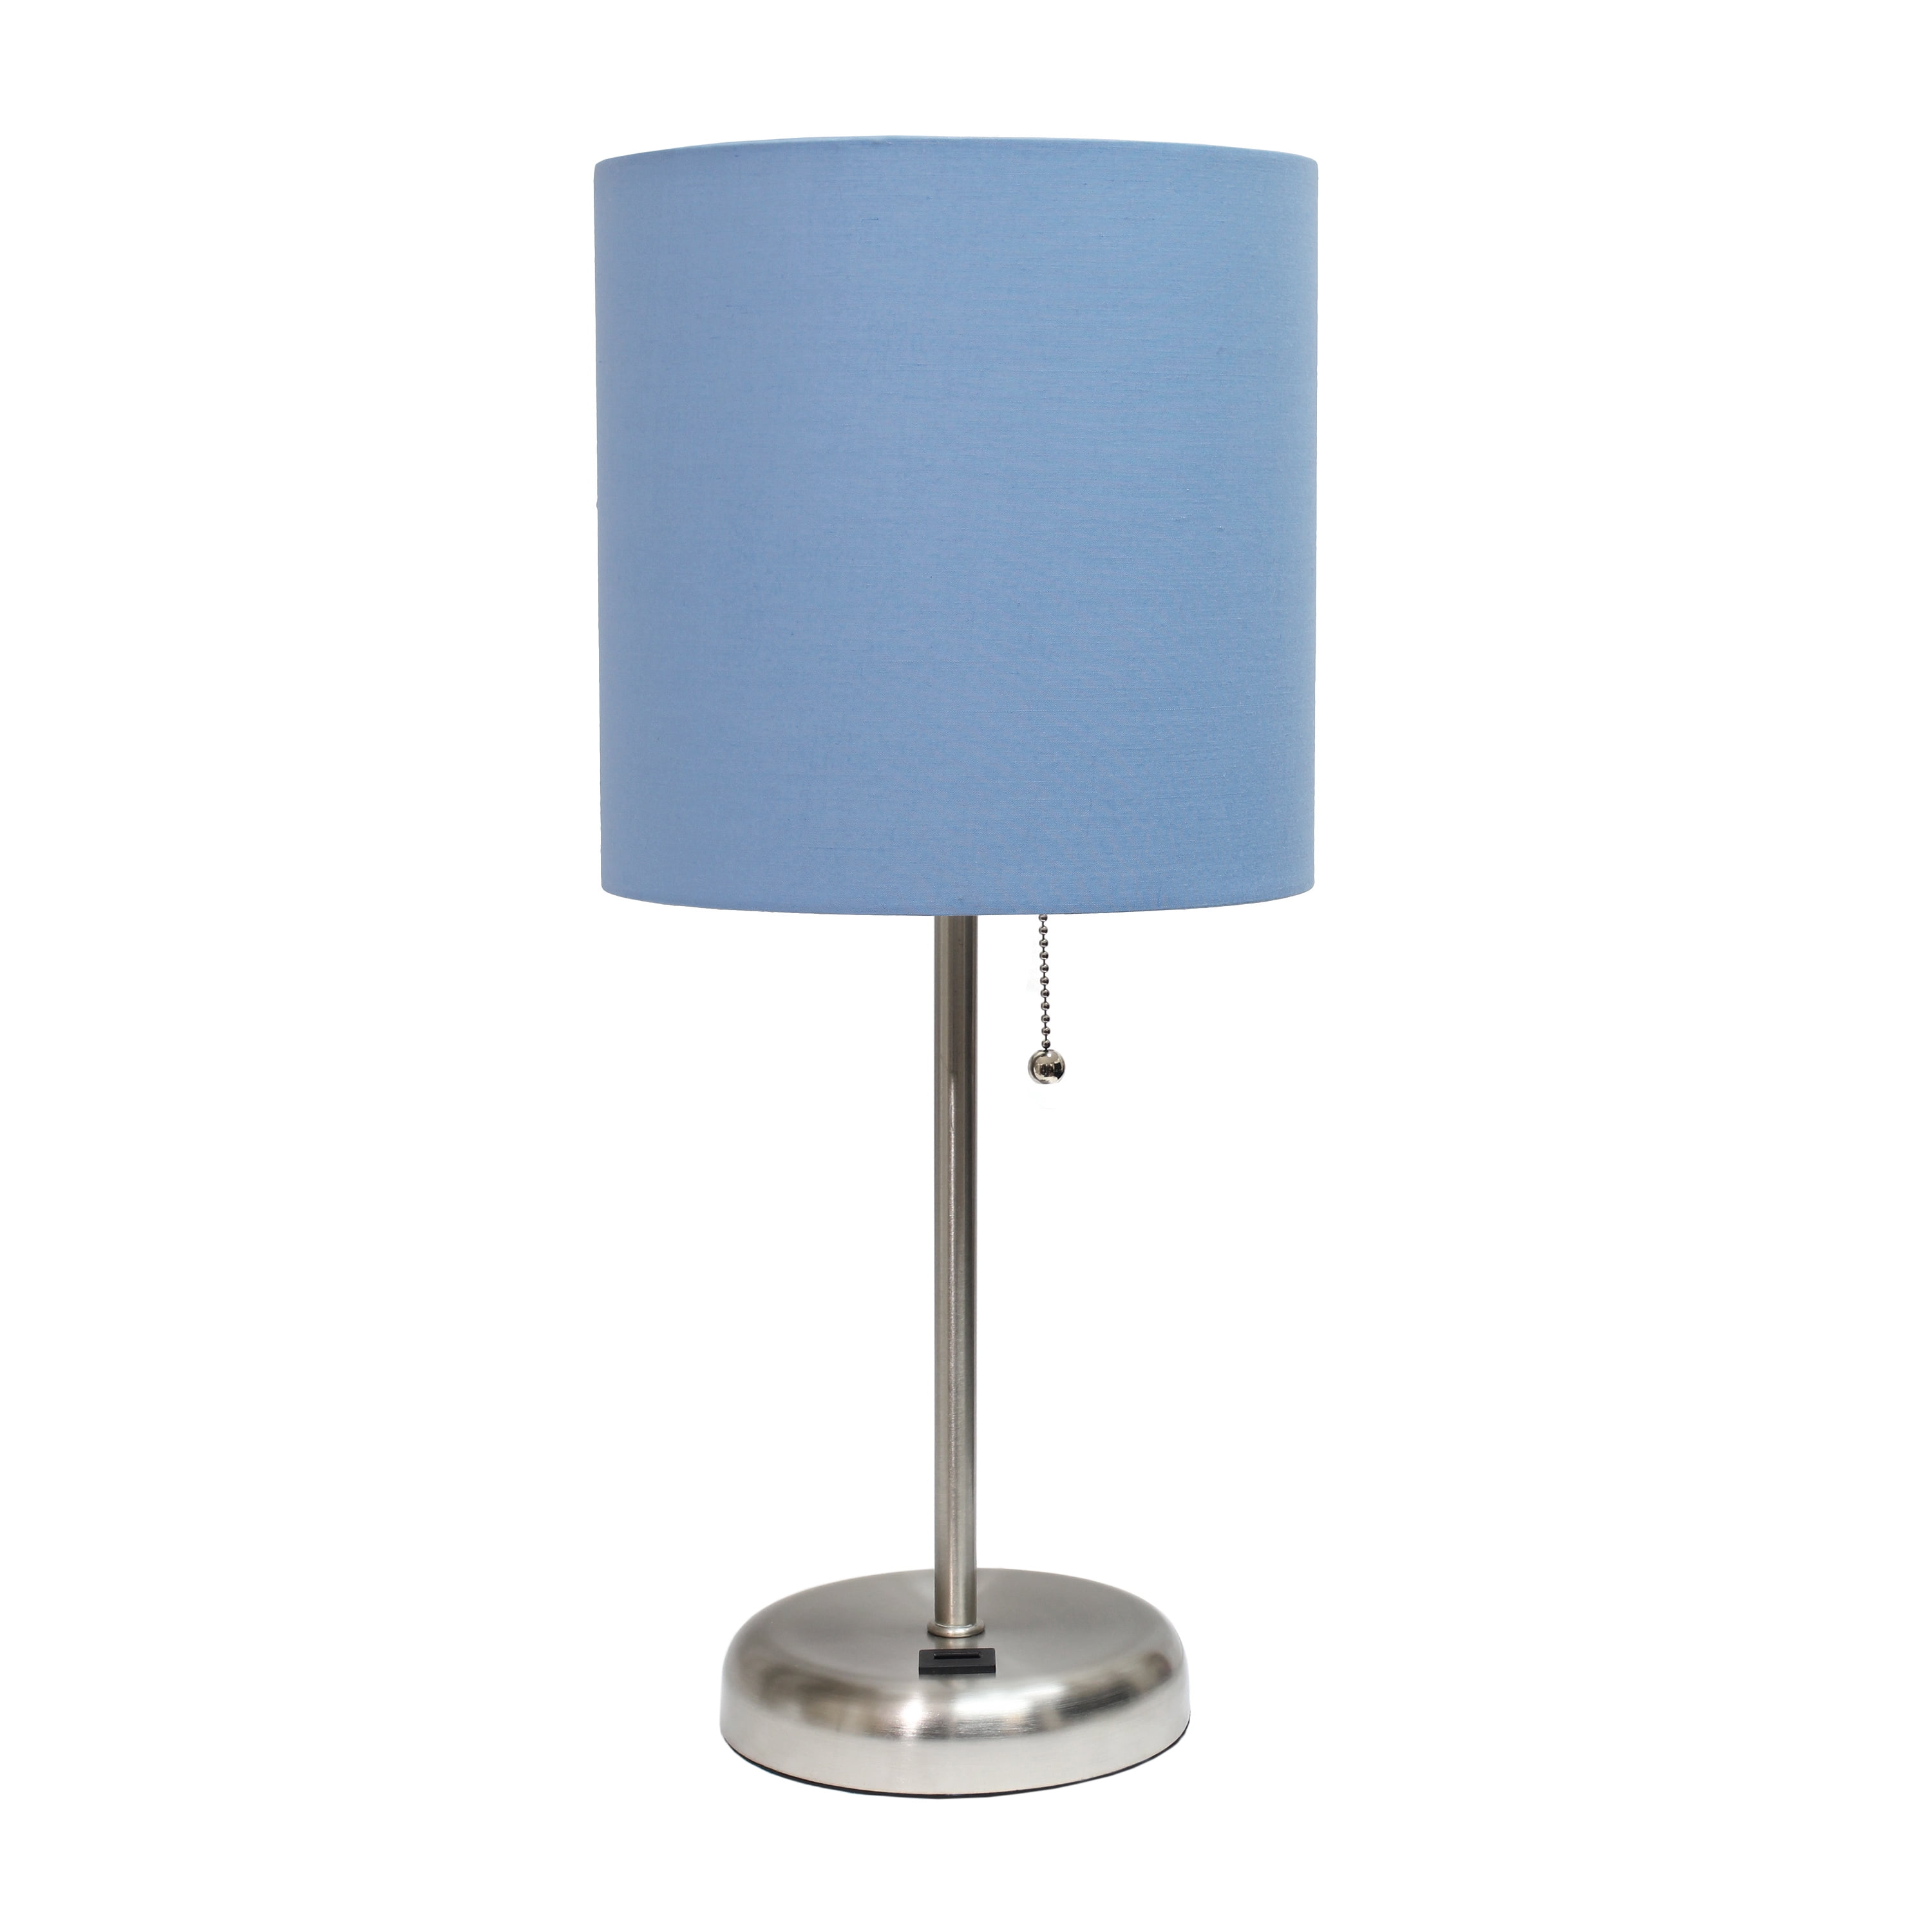 Lt2044-blu Stick With Usb Charging Port & Fabric Shade Table Lamp, Blue